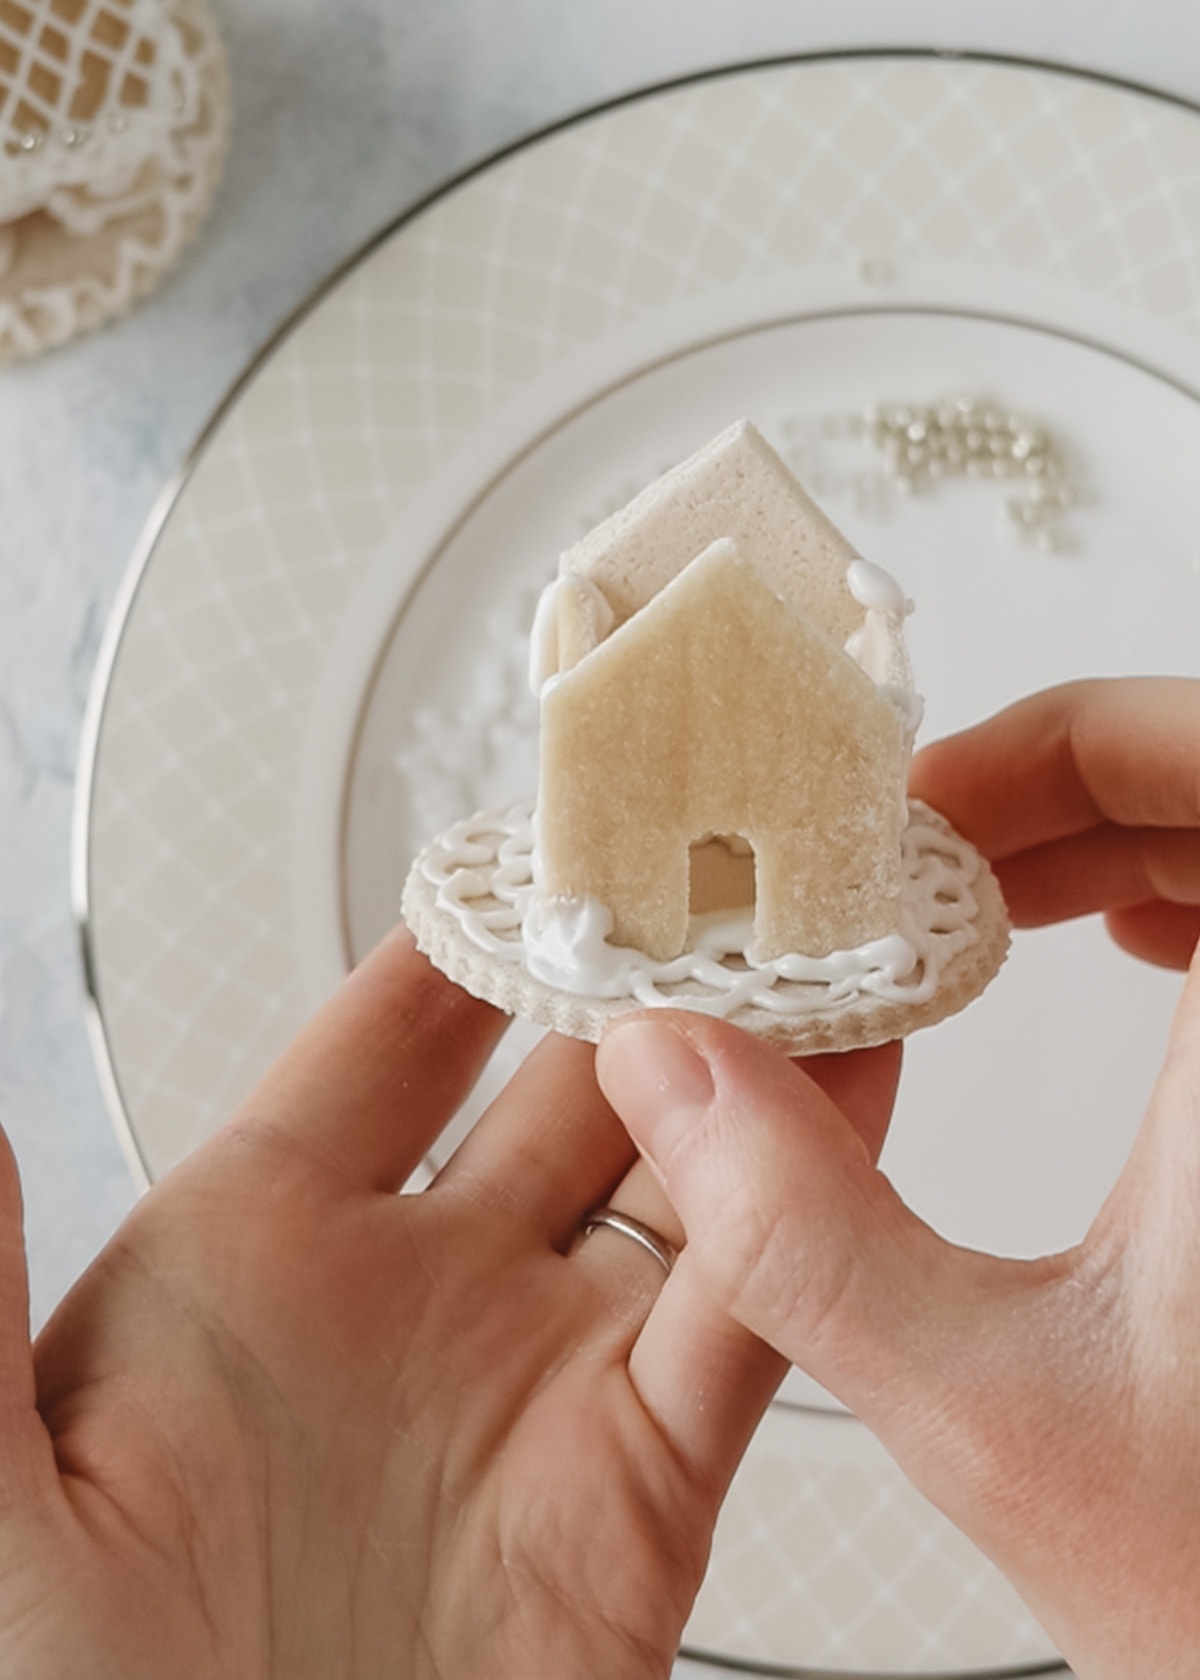 Hands holding a partially constructed mini salt dough gingerbread house.